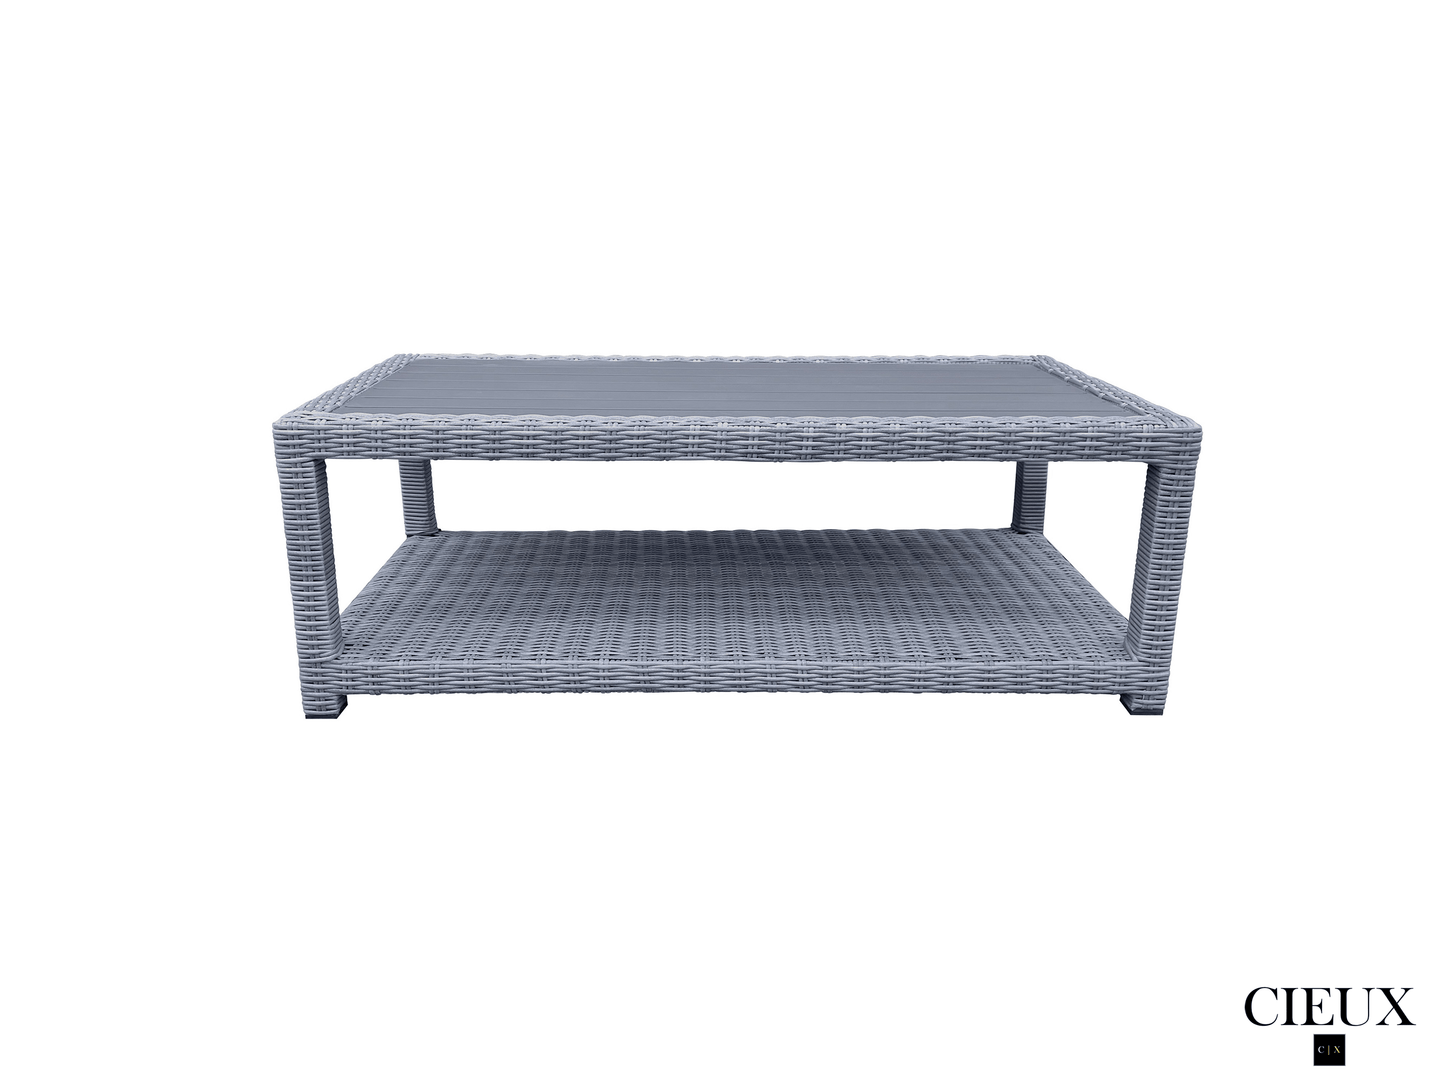 CIEUX Conversation Set Cannes Outdoor Patio Wicker Sofa Conversation Set in Grey with Sunbrella Cushions - Available in 2 Colours